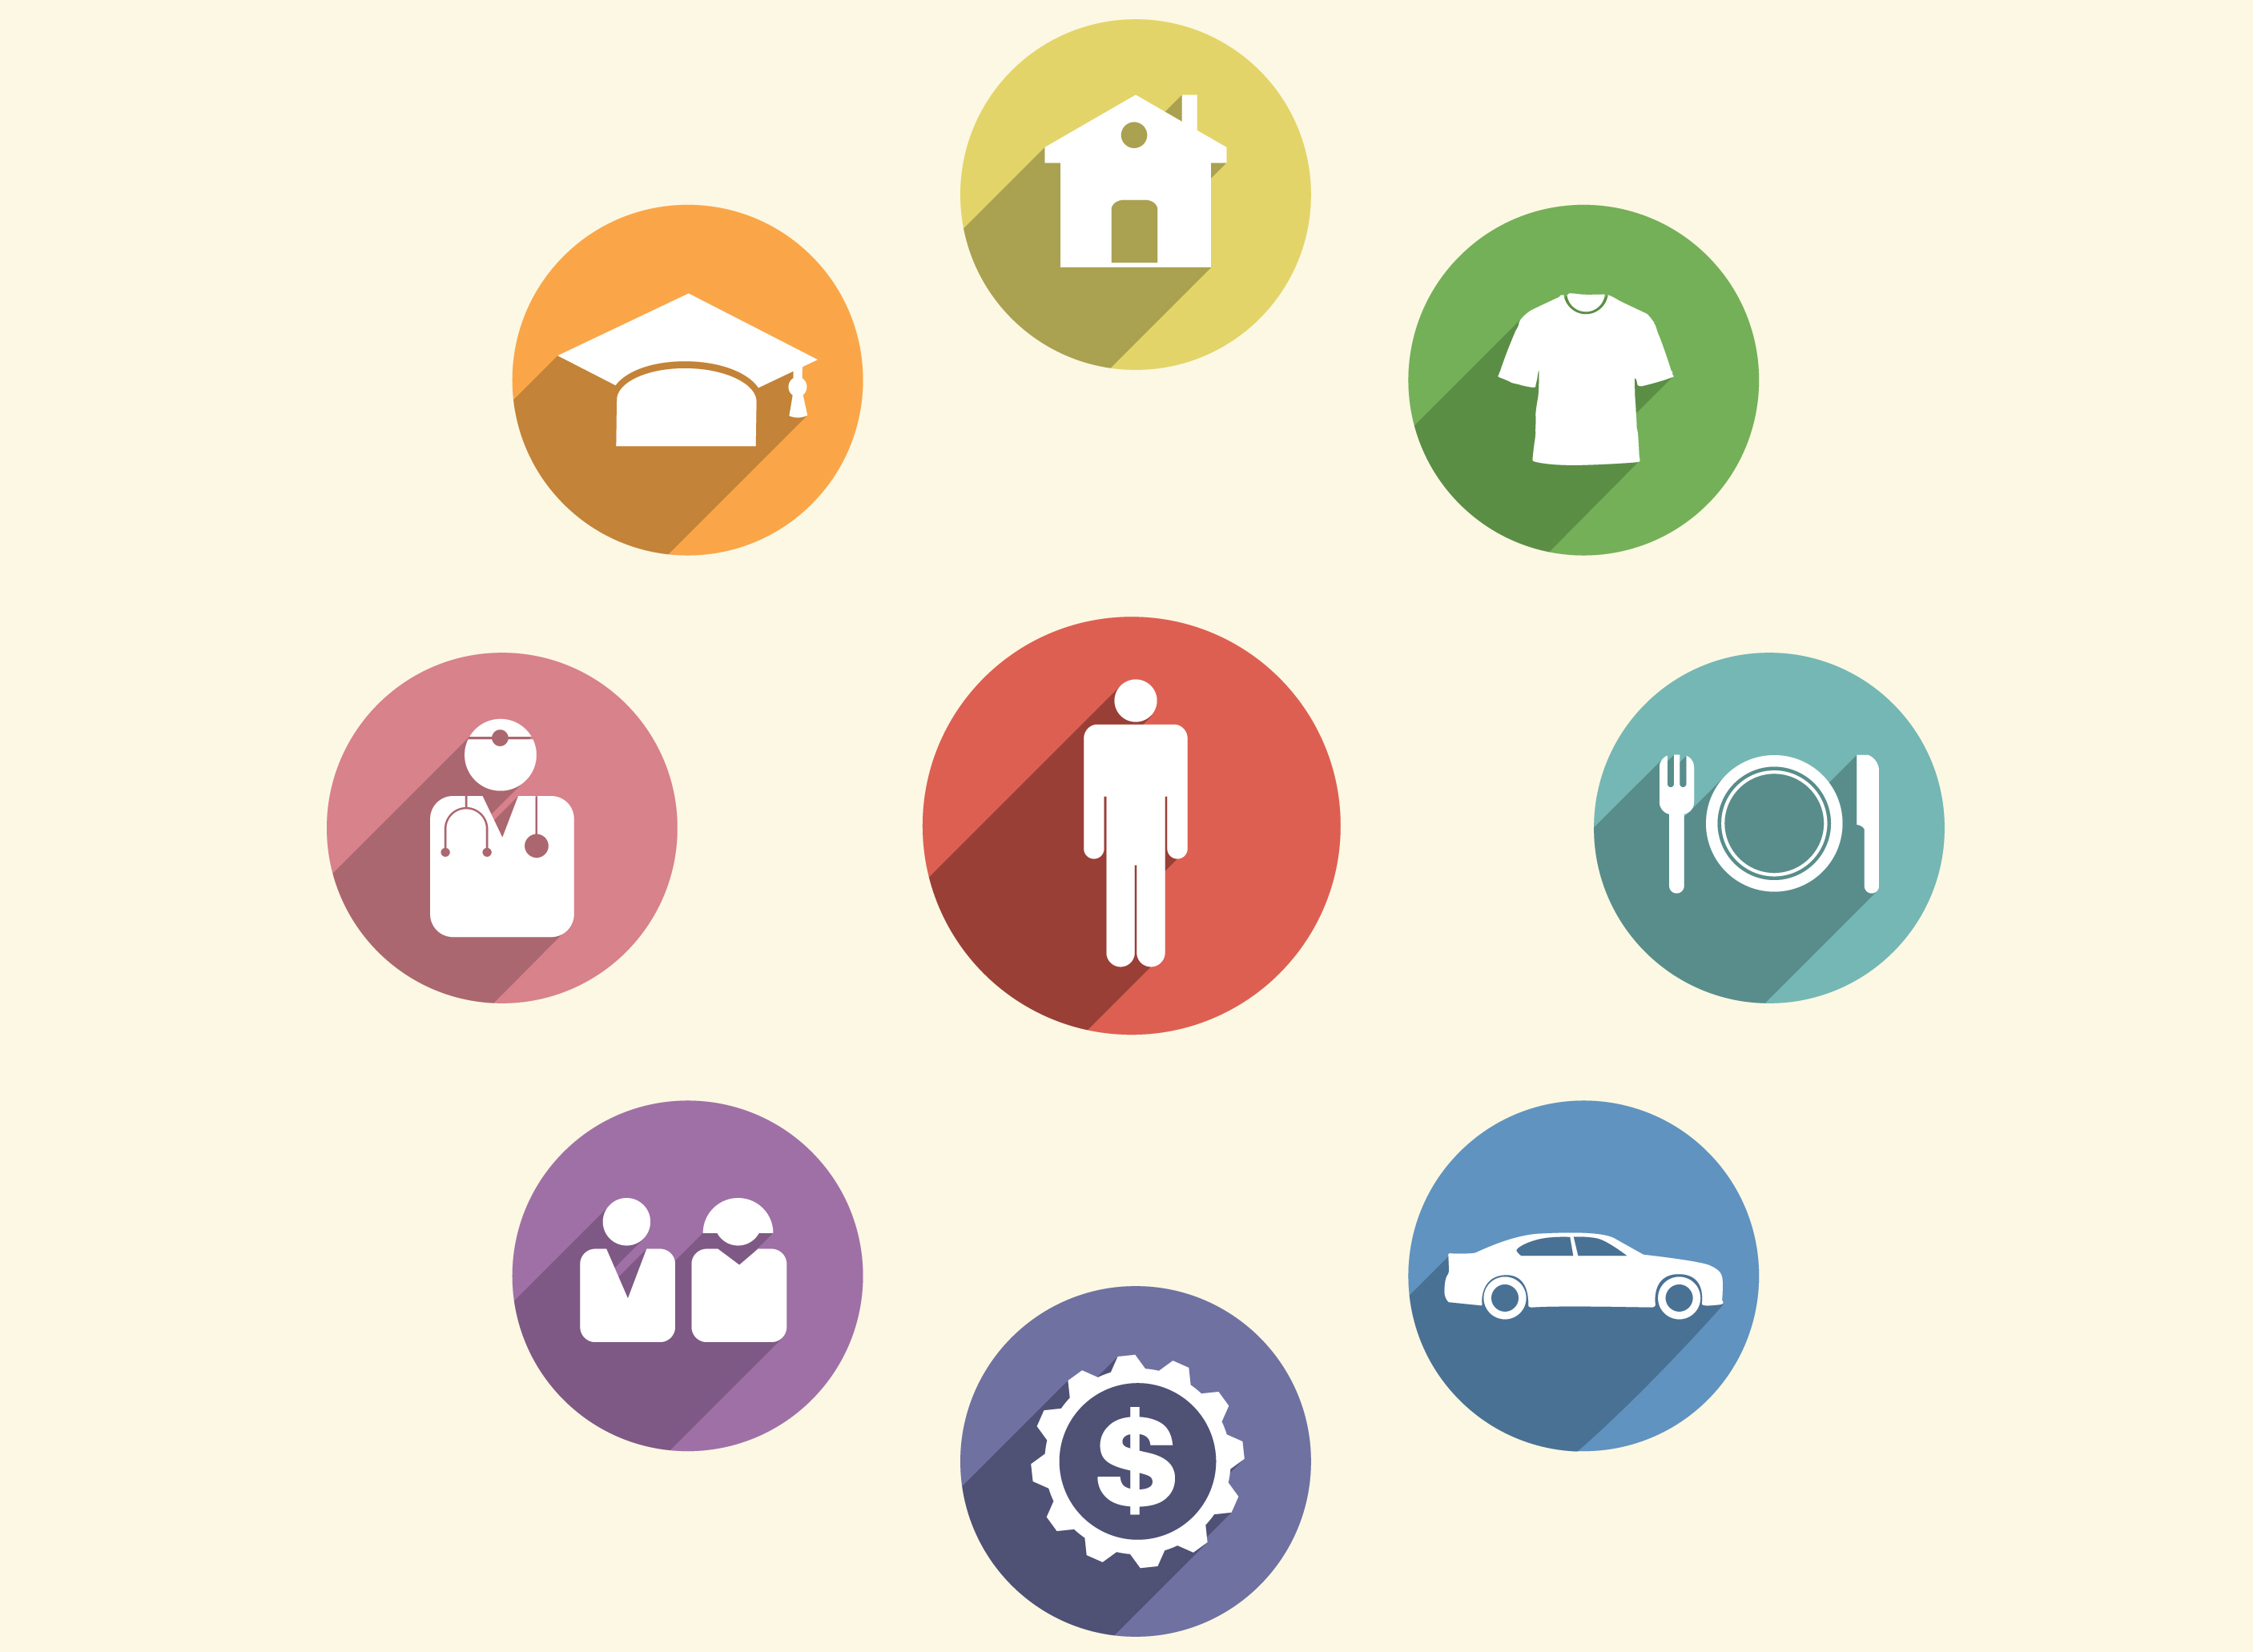 Icons representing basic human needs, such as housing, food, clothing, transportation